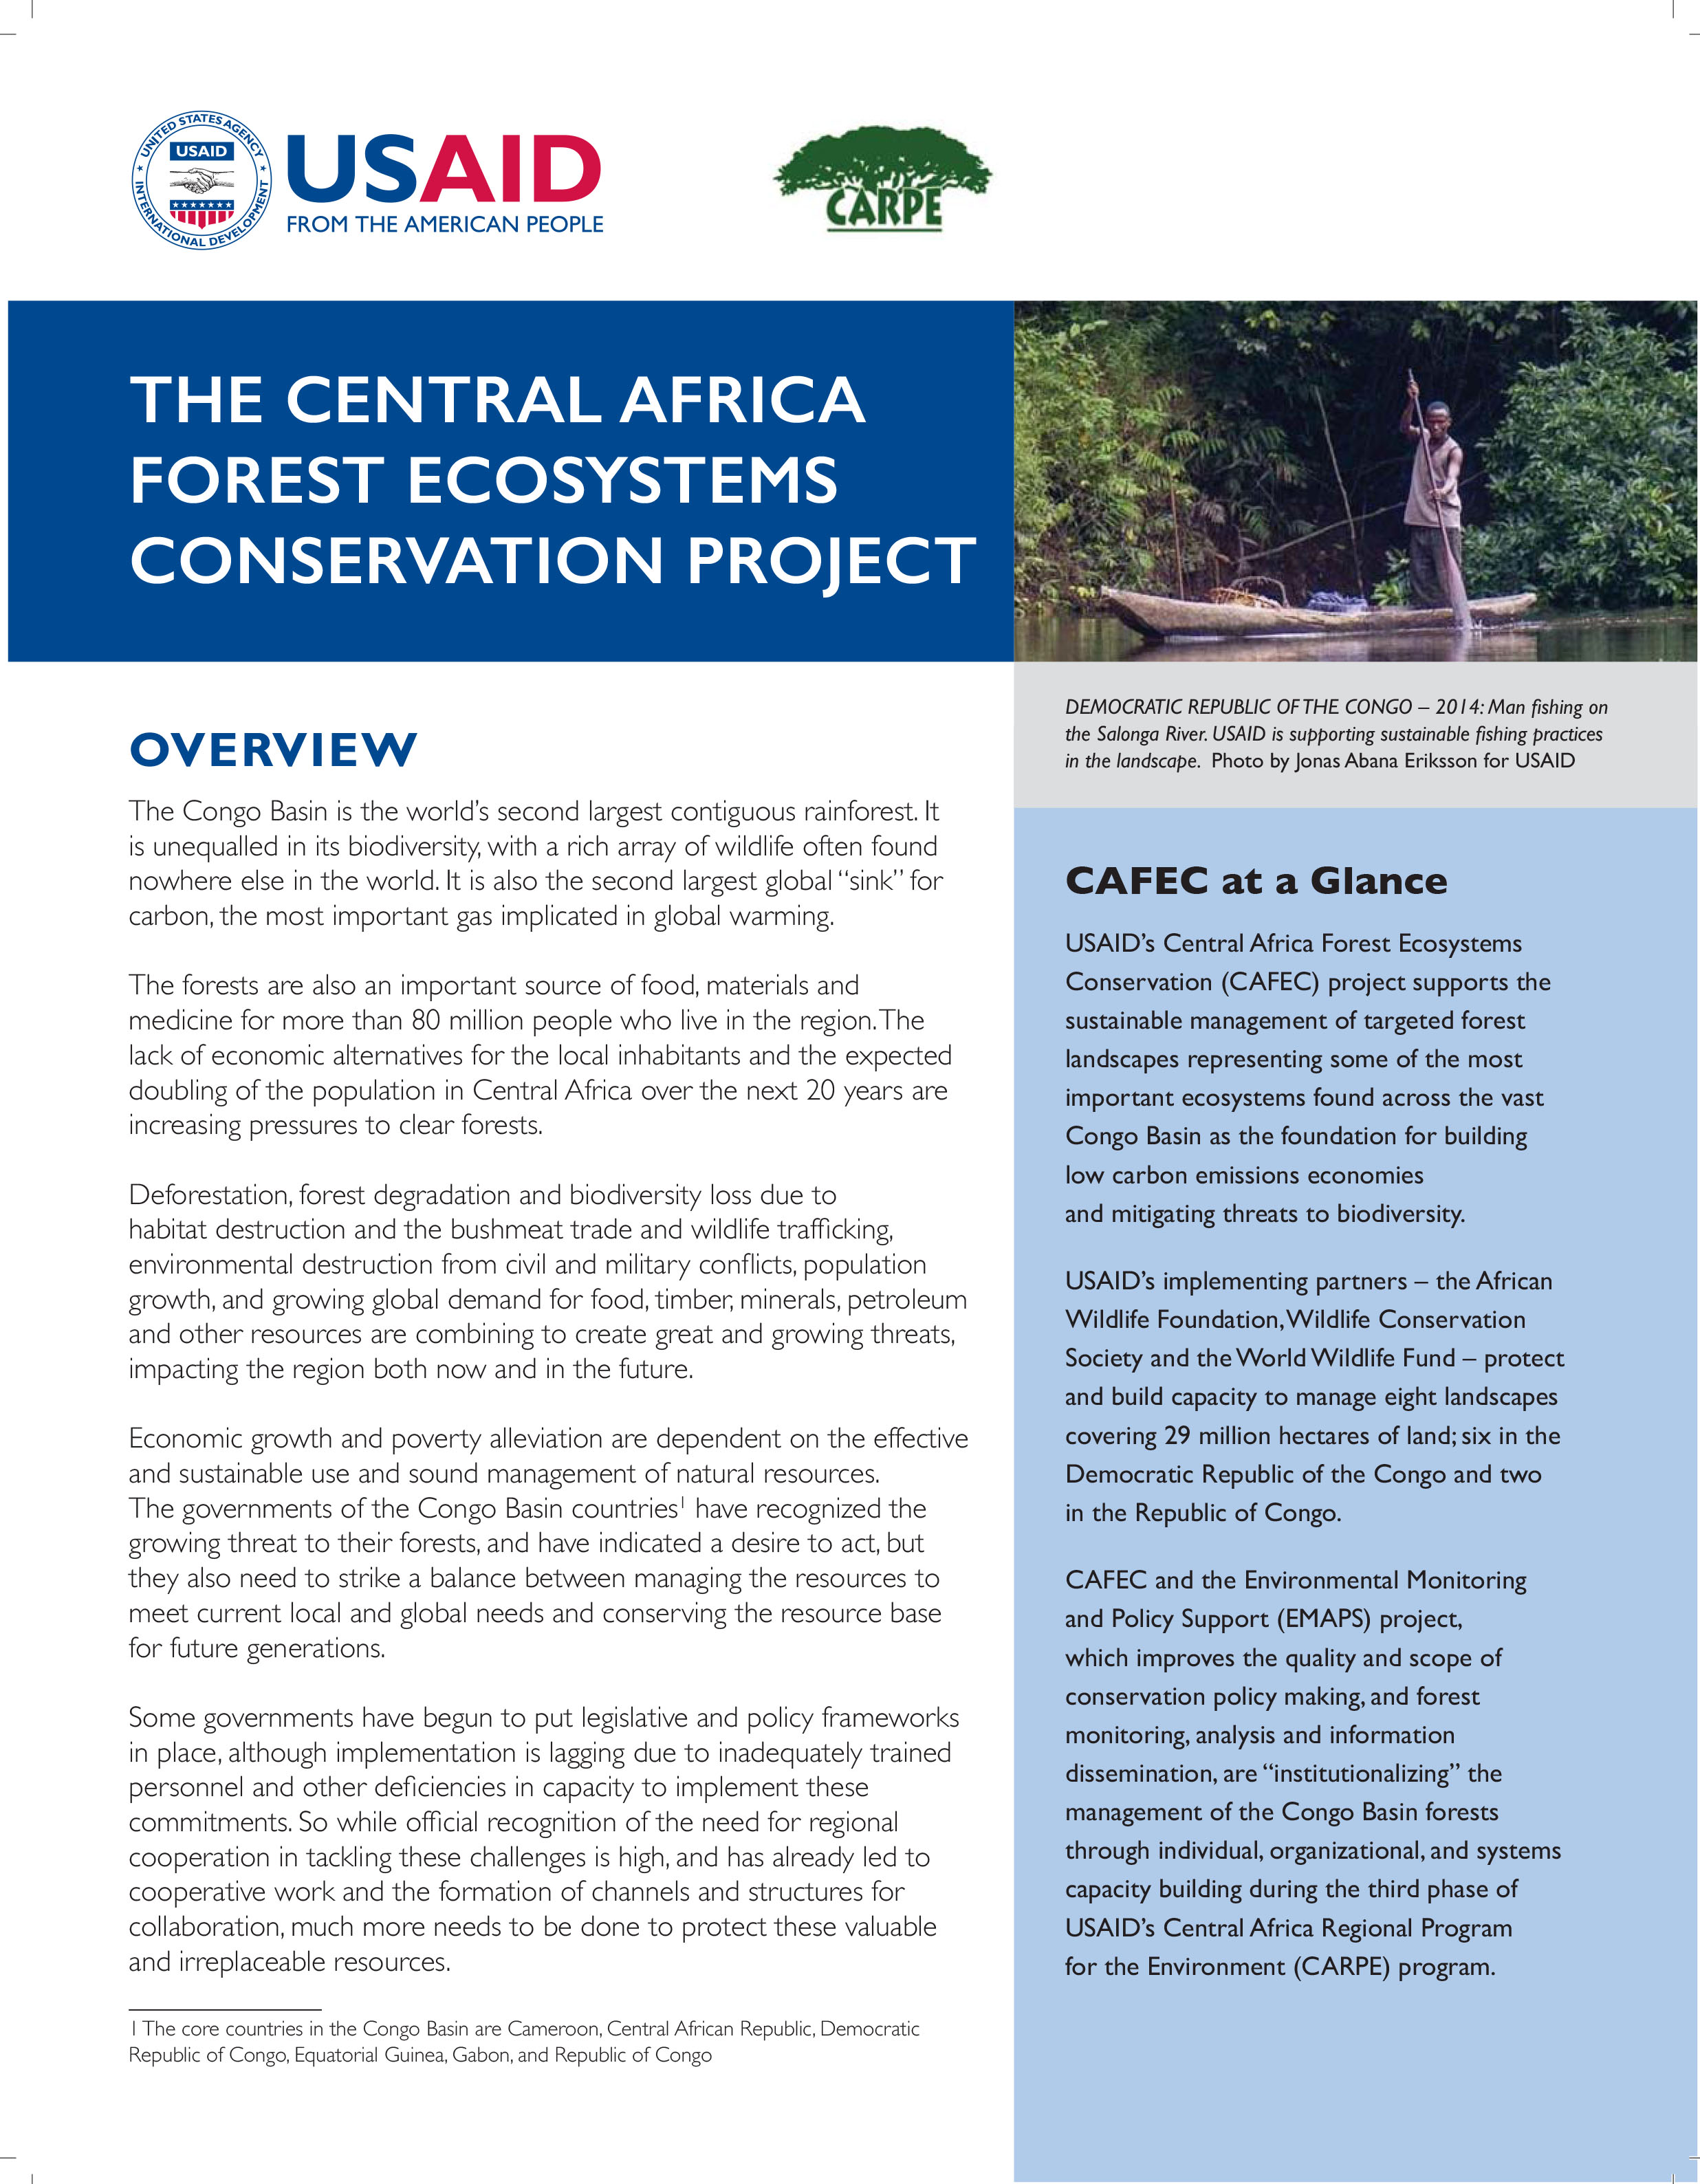 The Central Africa Forest Ecosystems Conservation Project